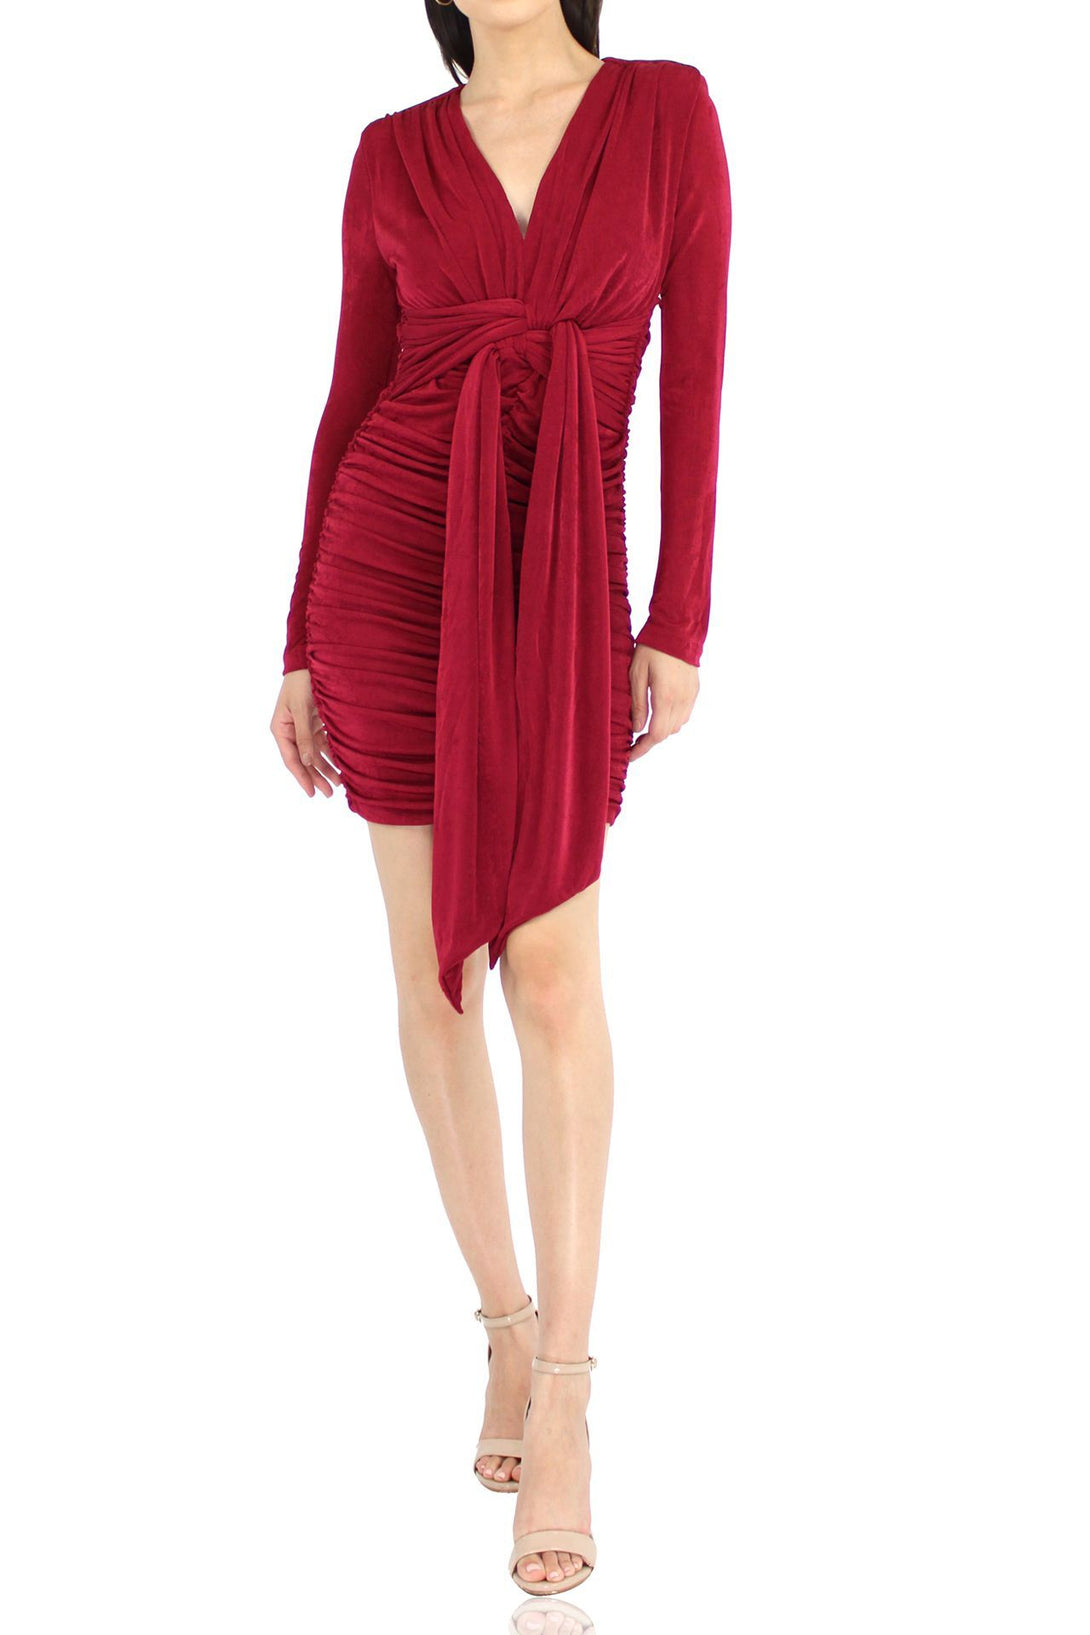 Ruffle-Red-Dress-For-Women-By-Kyle-Richards